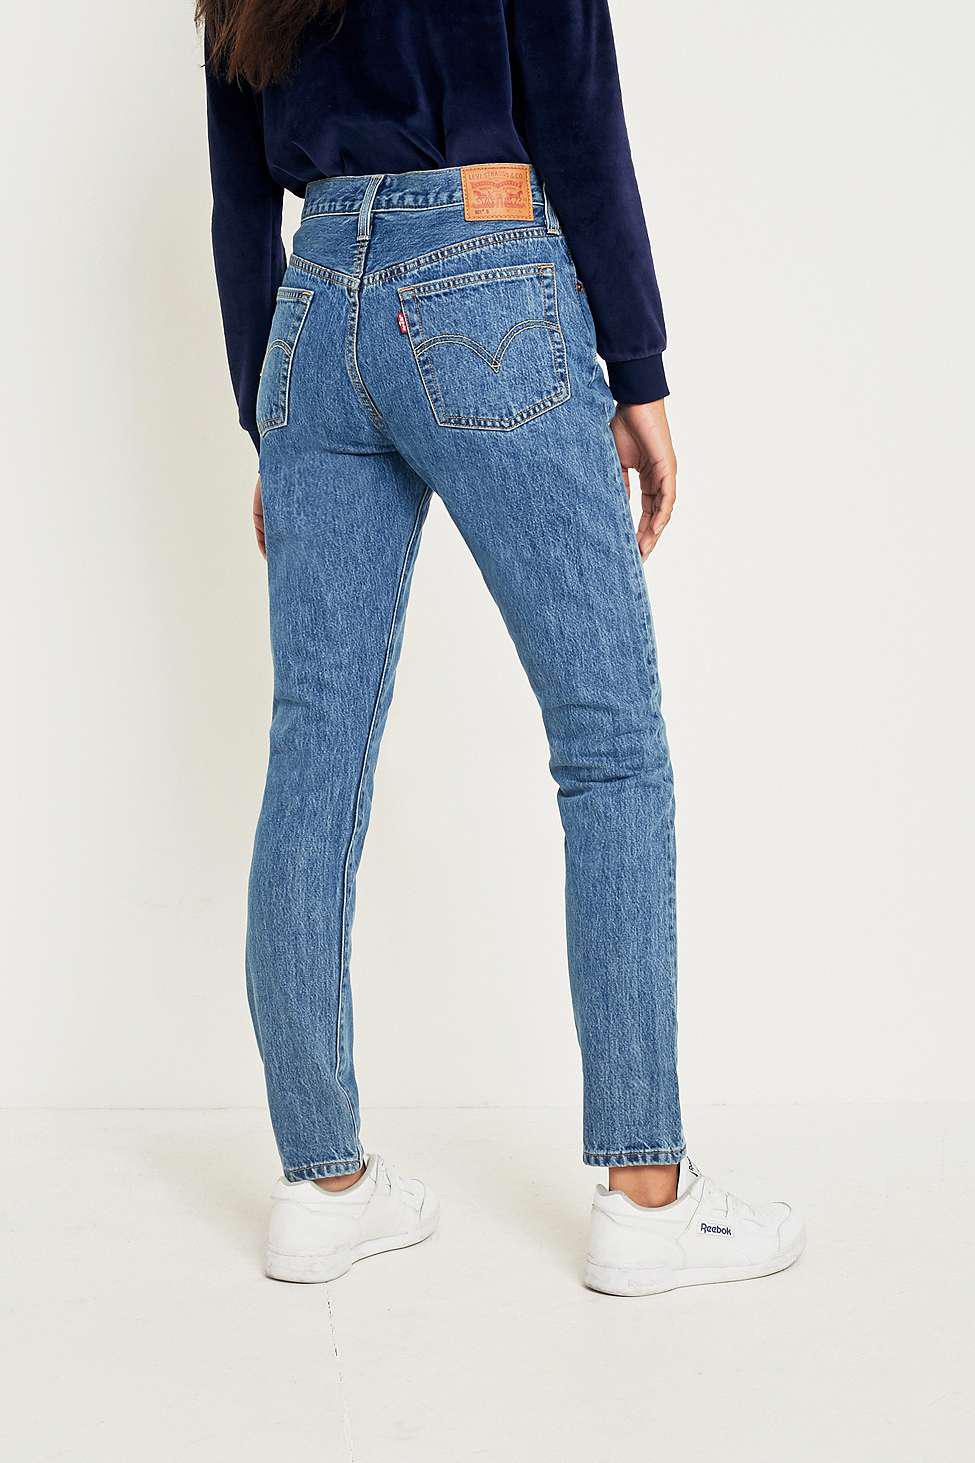 levi's 501 skinny rolling dice Cheaper Than Retail Price> Buy Clothing,  Accessories and lifestyle products for women & men -